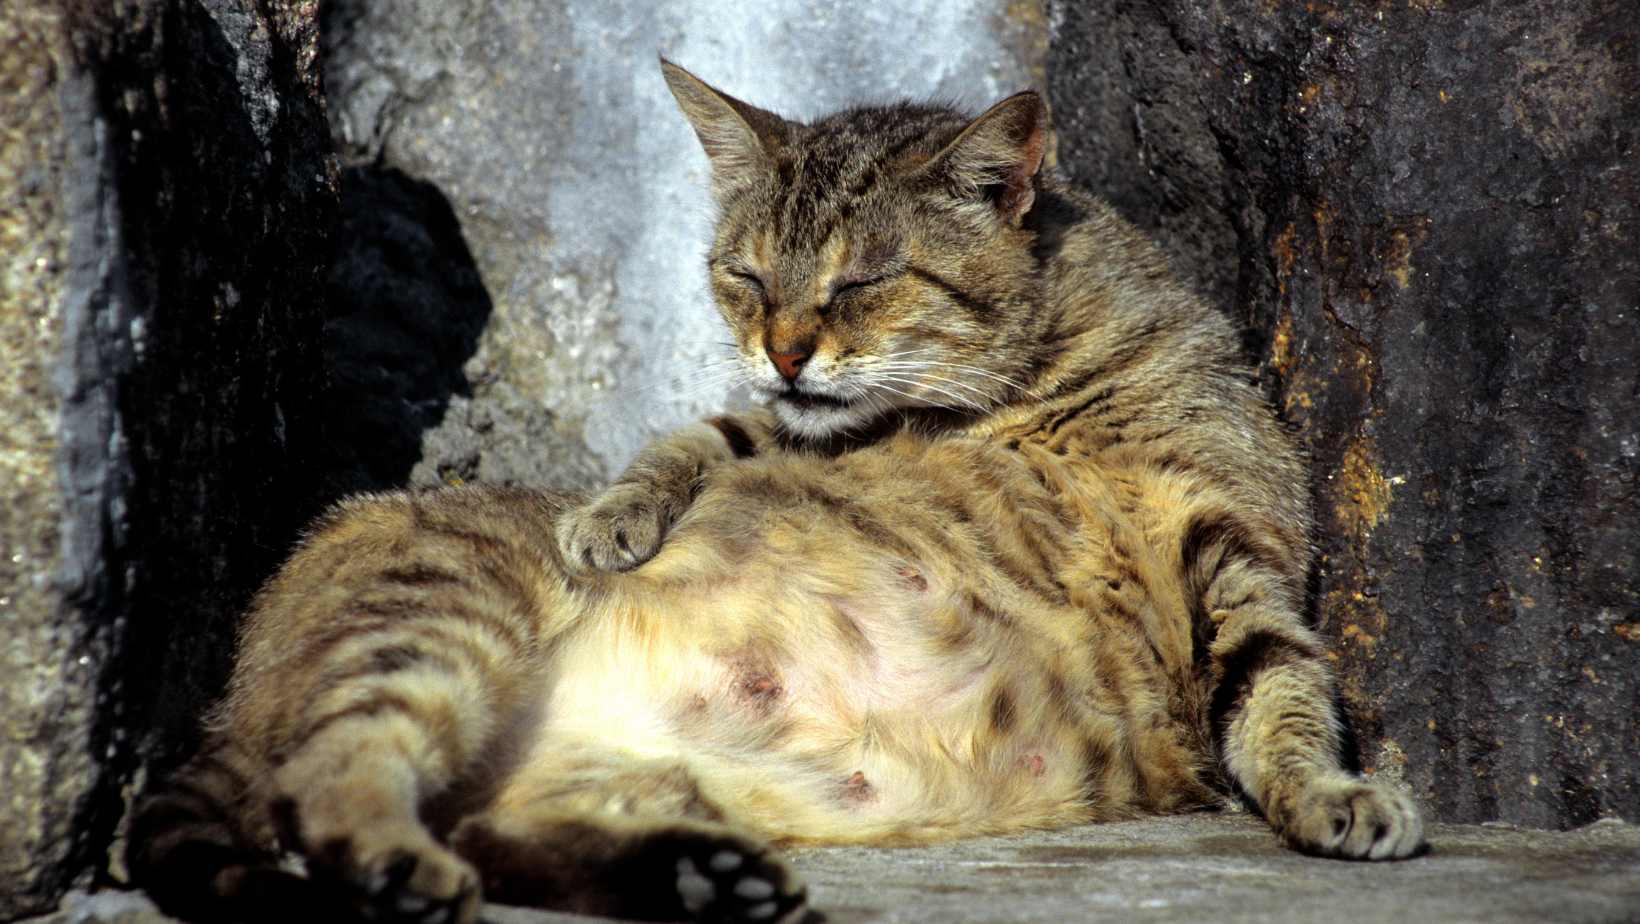 What Do Pregnant Cats Look Like?